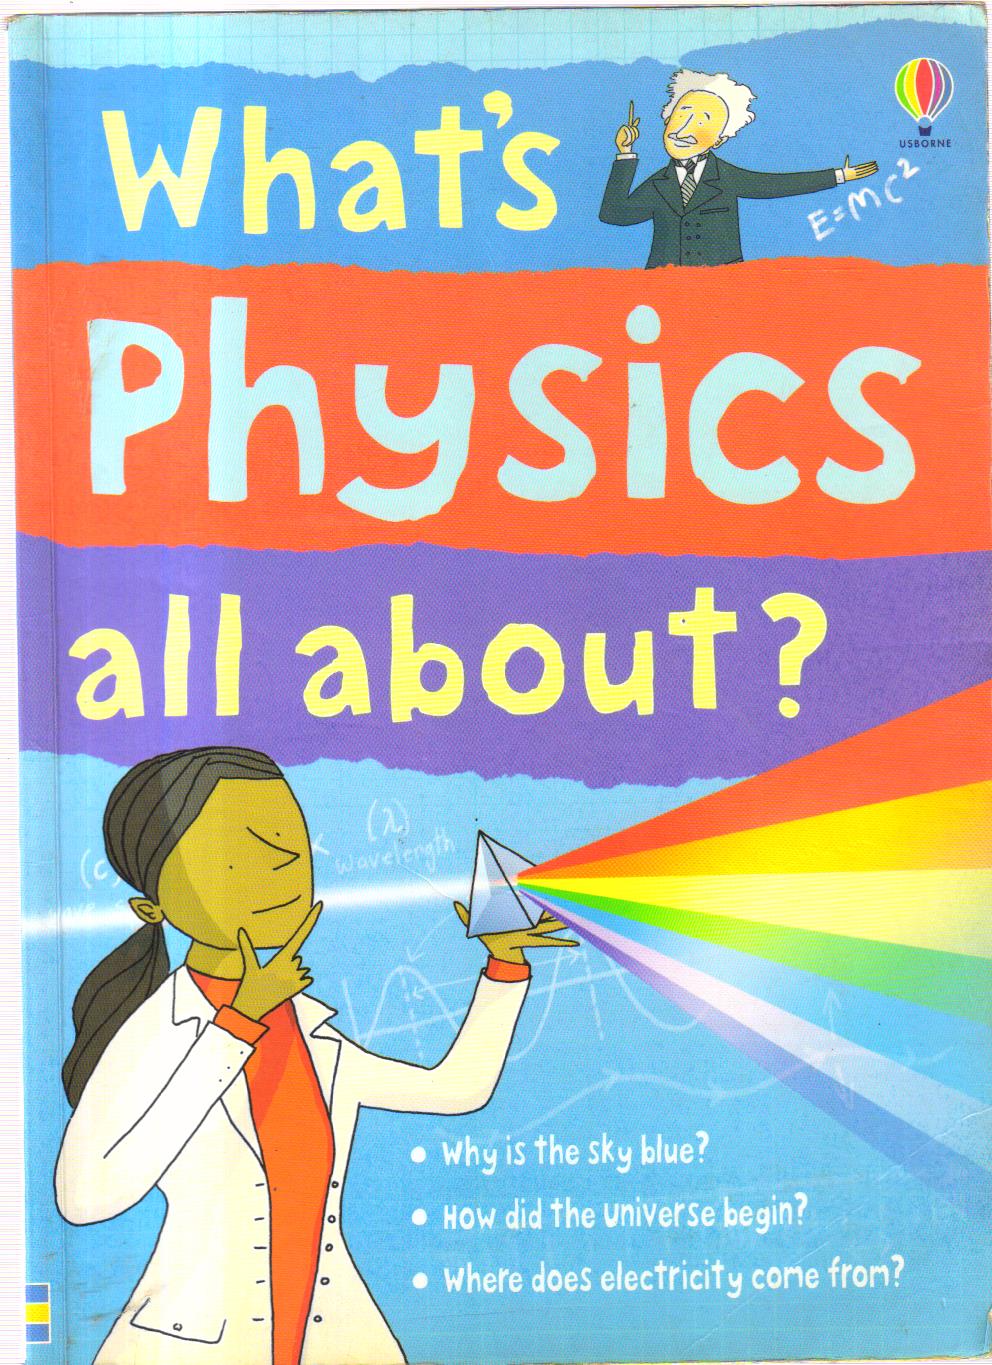 What Physics all about?